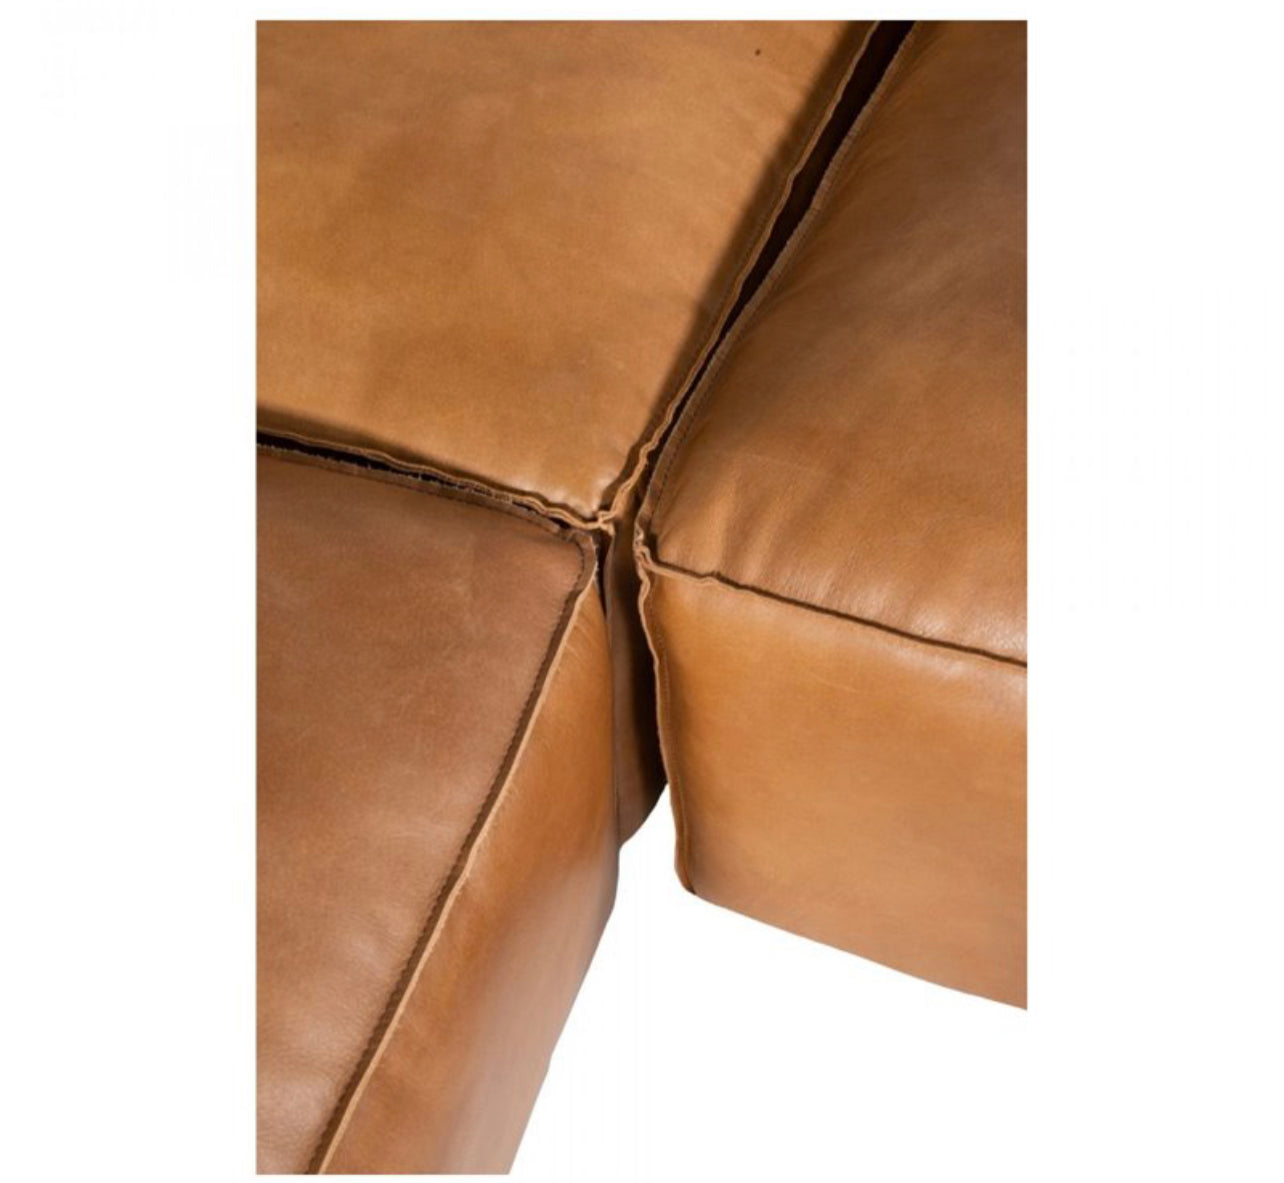 Luxe Leather L Shape Sectional